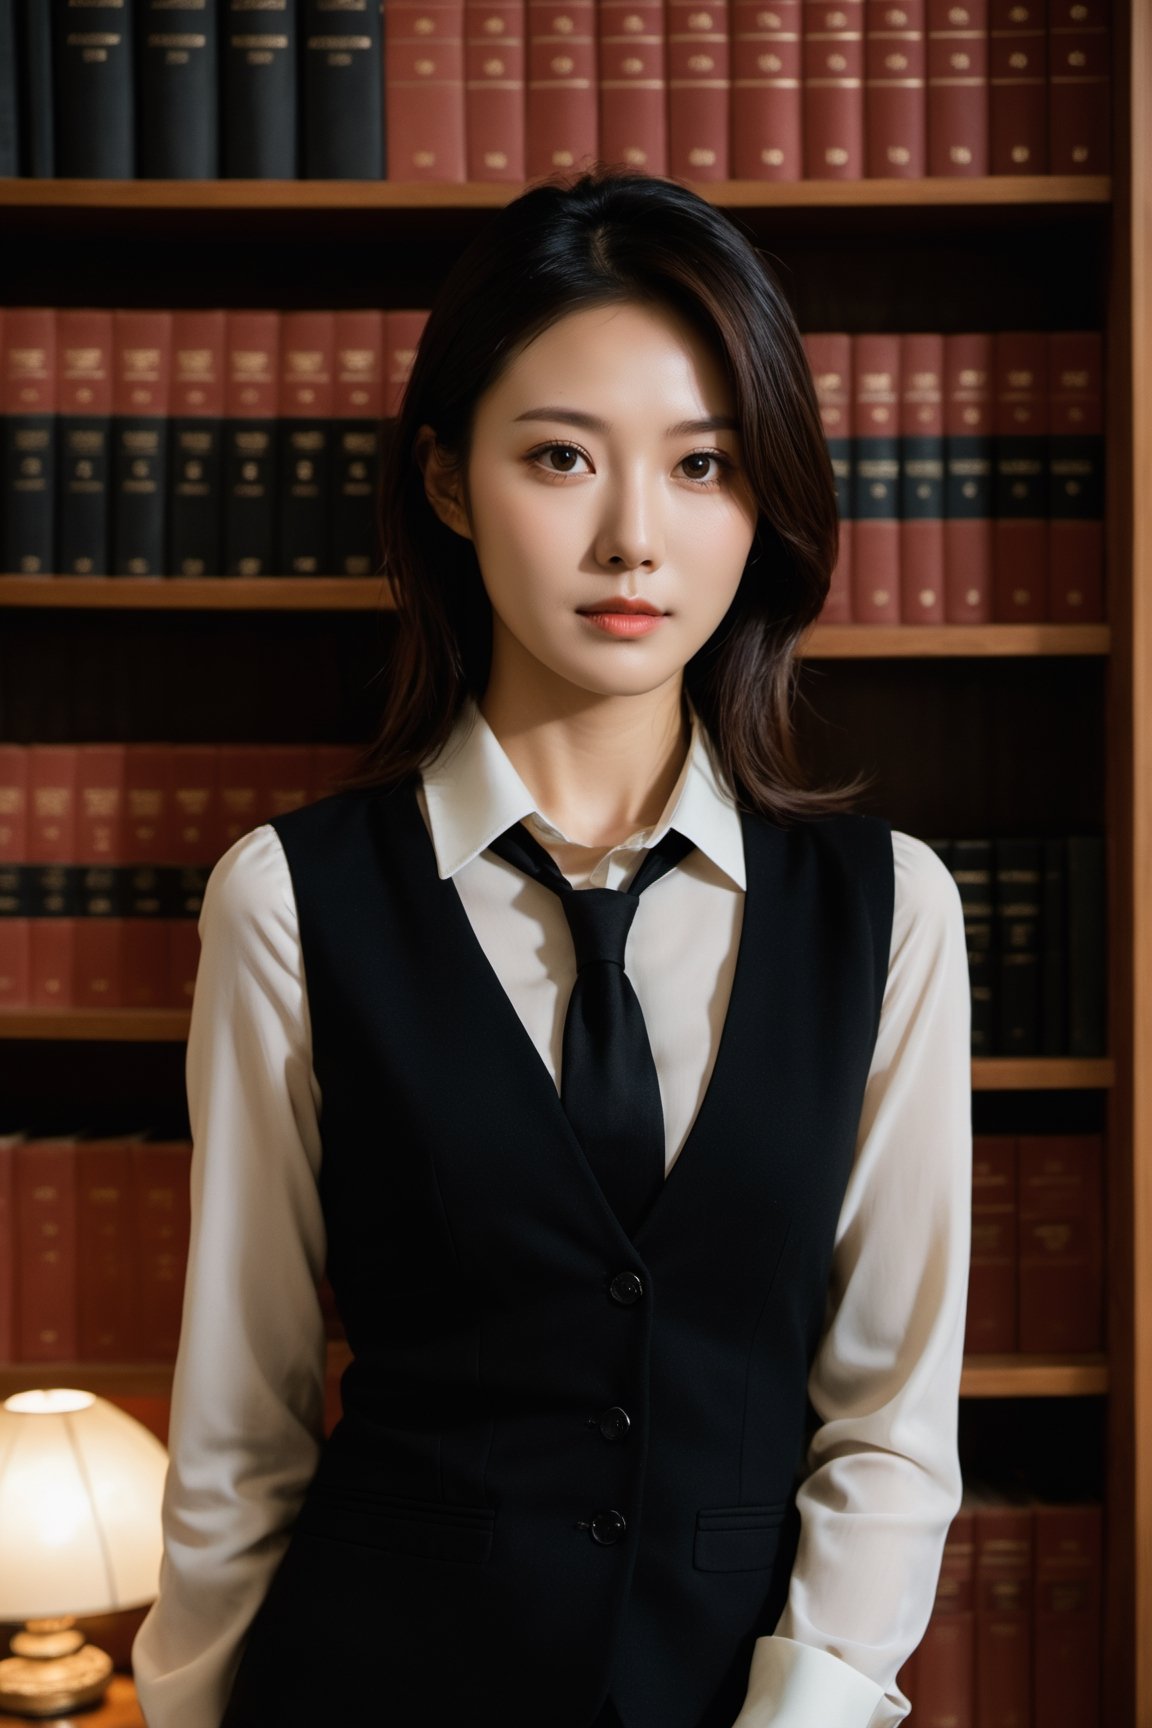 xxmix_girl, 1girl, Realistic, Candid Photo of an Asian female lawyer, reminiscent of the shots by Annie Leibovitz, scene set in a well-furnished office, books lining the shelves behind her, warm color temperature, calm demeanor emphasized, soft smile, black pantyhose, hint of contentment evident, captured using a 50mm lens, balance between subject and surroundings, natural lighting from a nearby window, gentle shadows cast, serene atmosphere